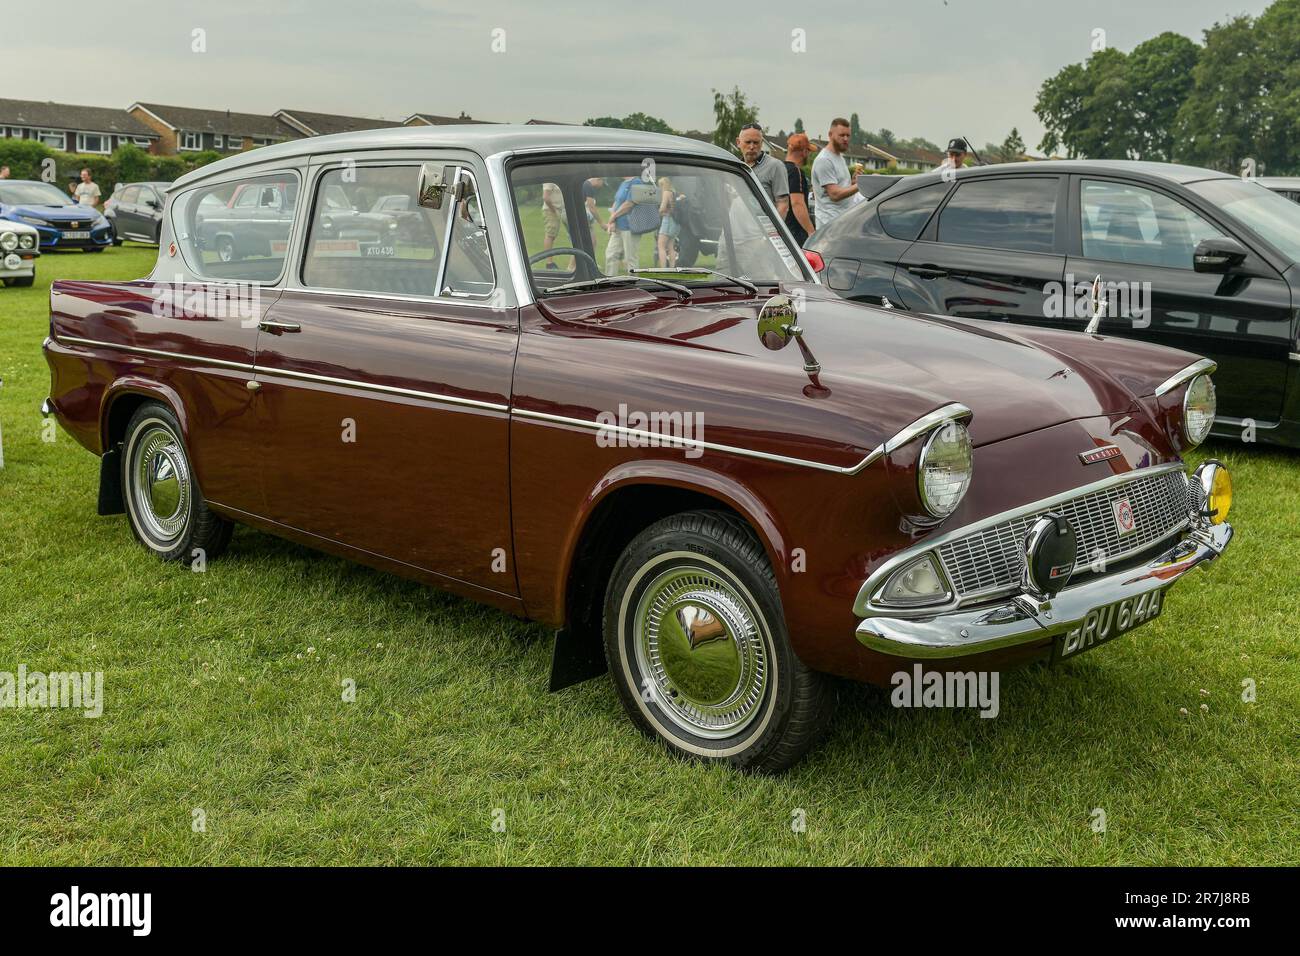 Ford Anglia Banque D'Images